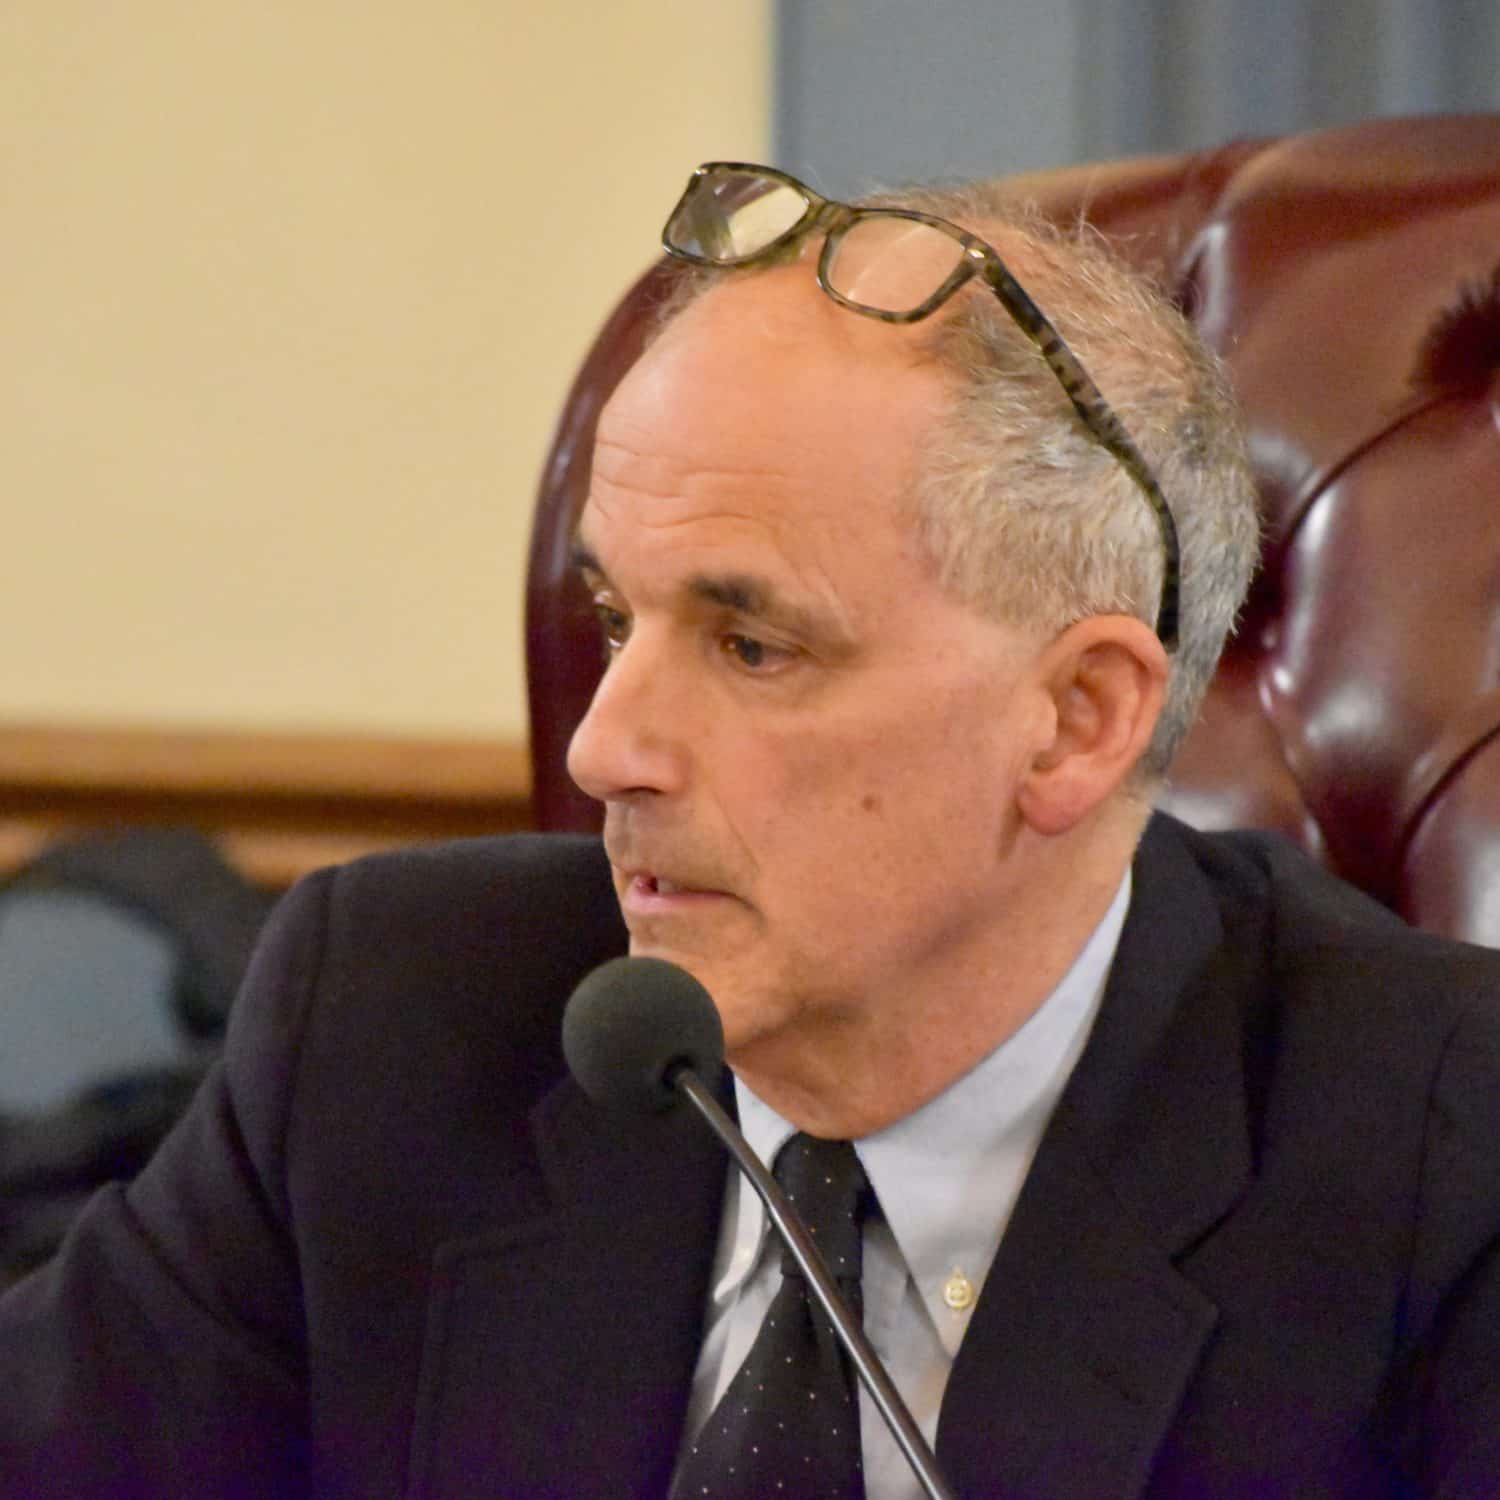 Democratic City Councilors propose minimum wage increase for Cranston city employees